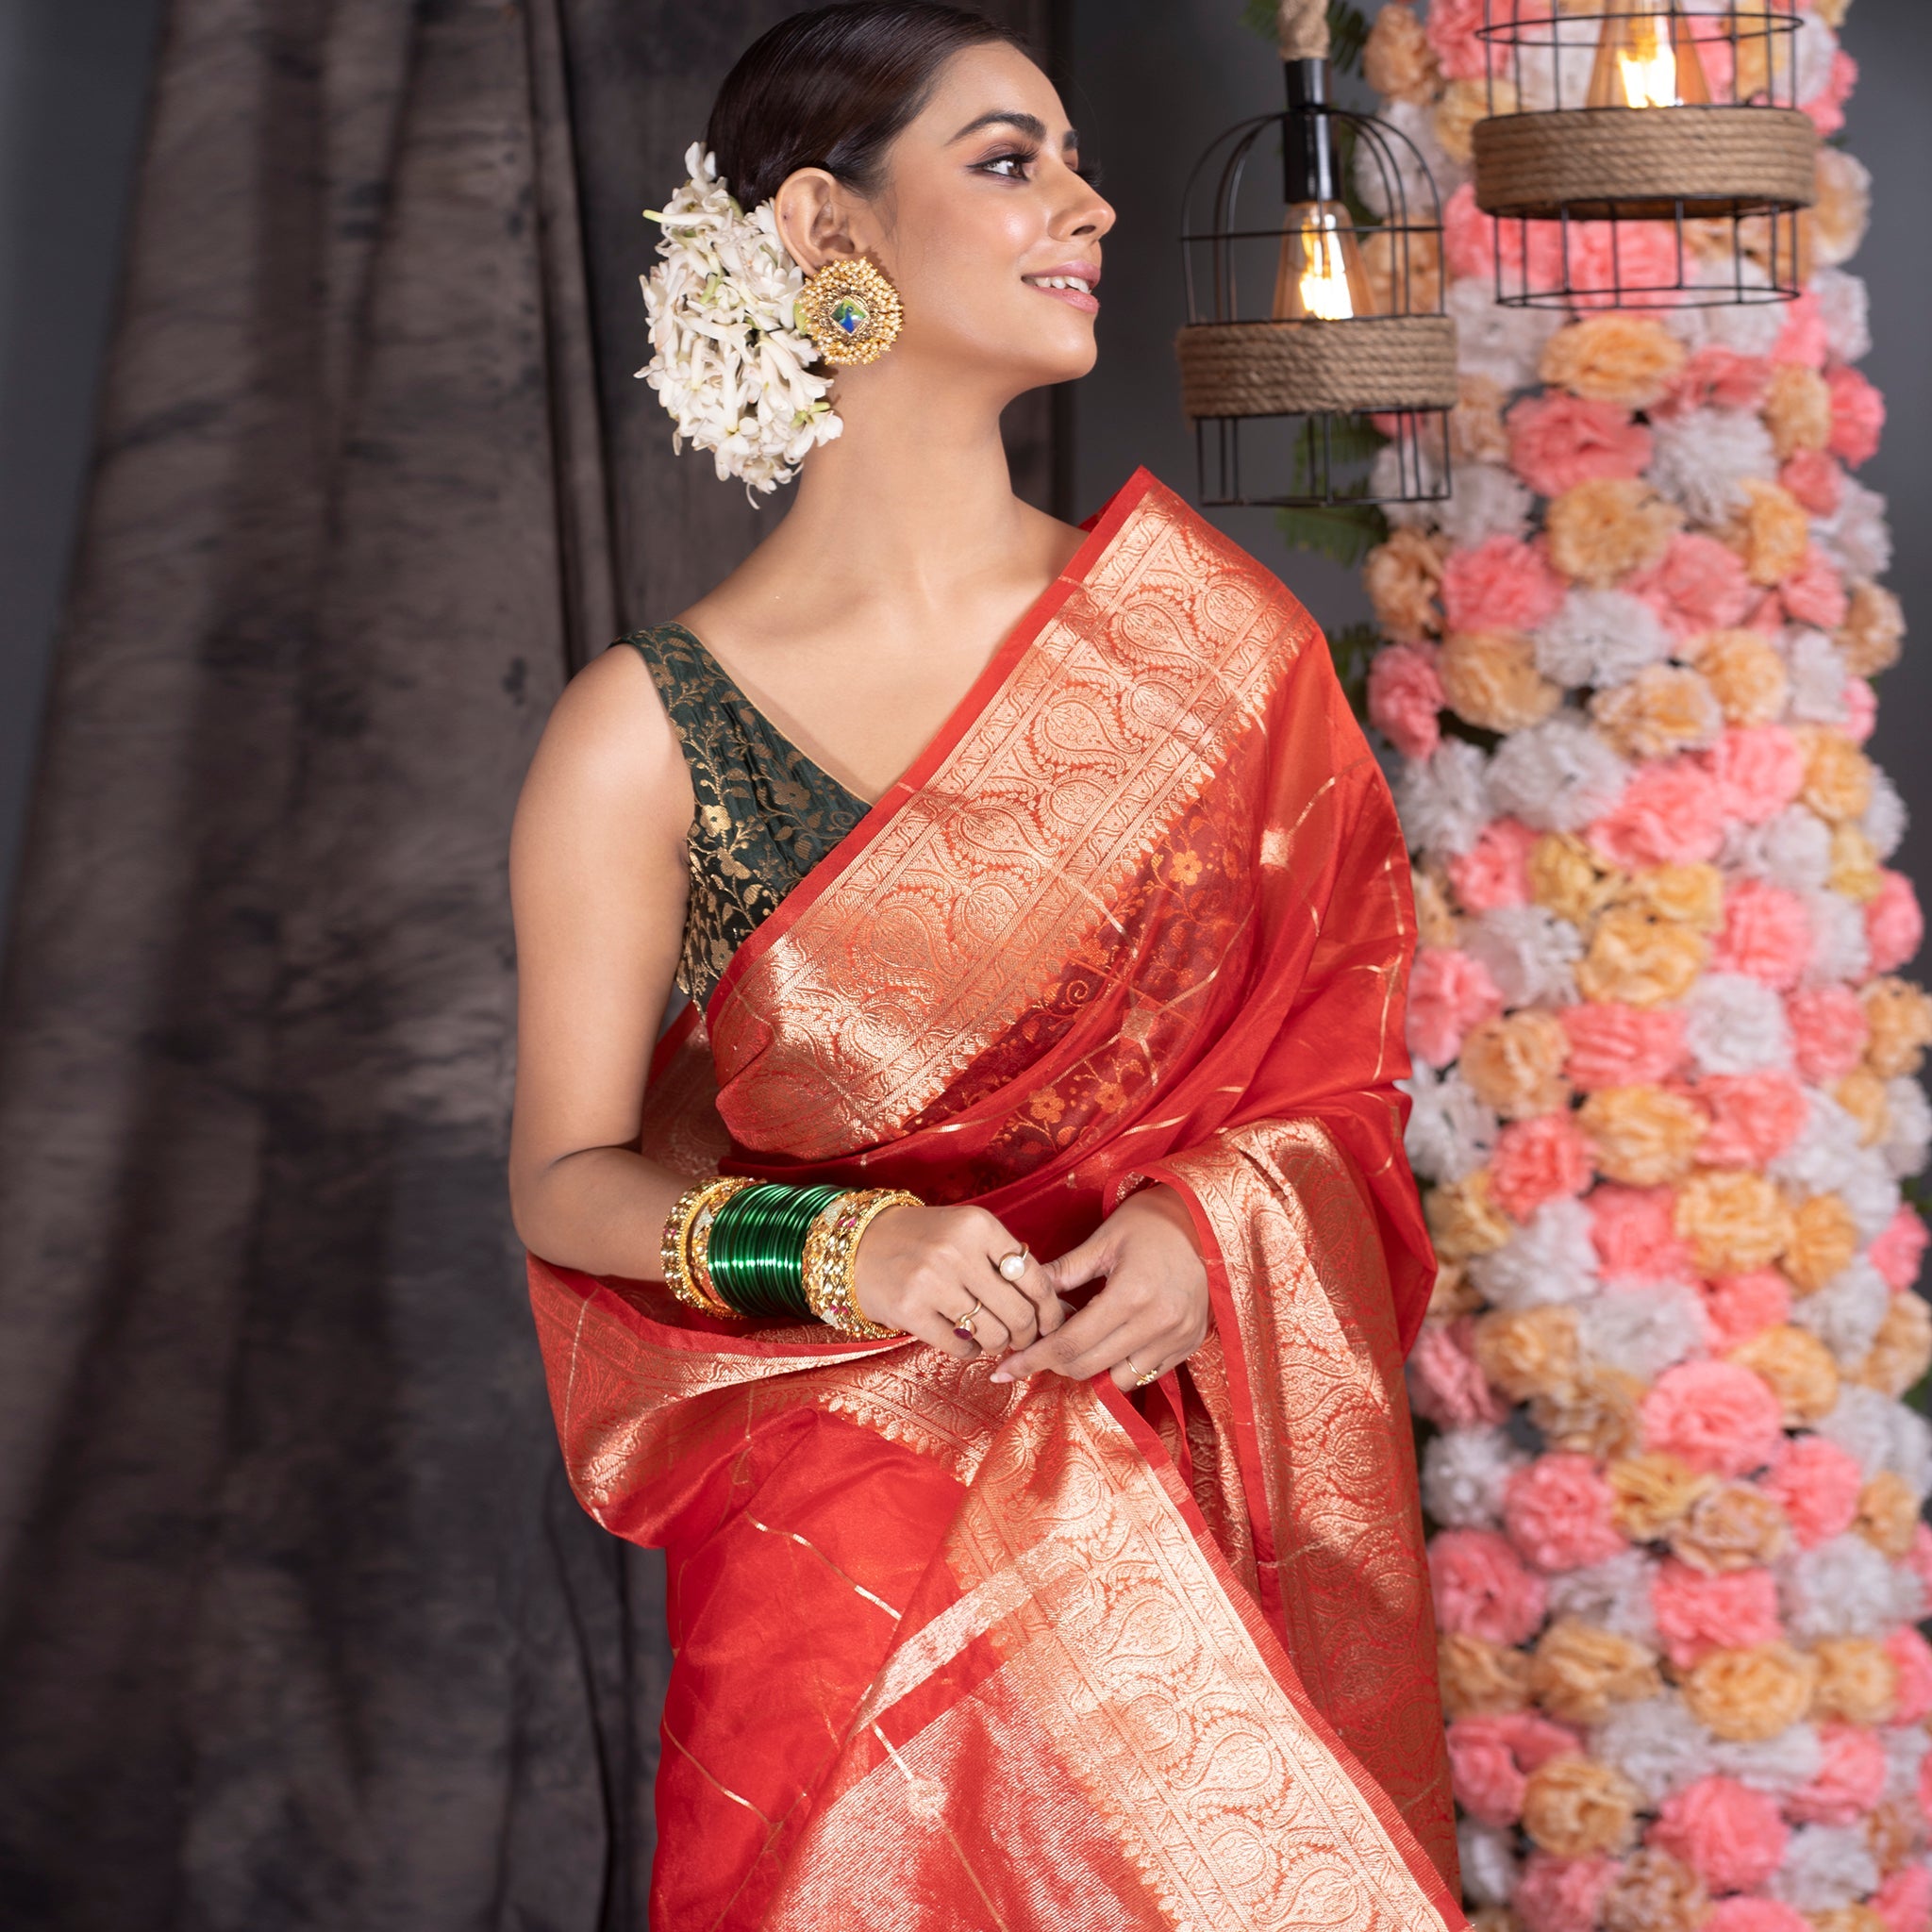 Women's Red Organza Saree With Square Motifs And Ambi Jaal Border - Boveee